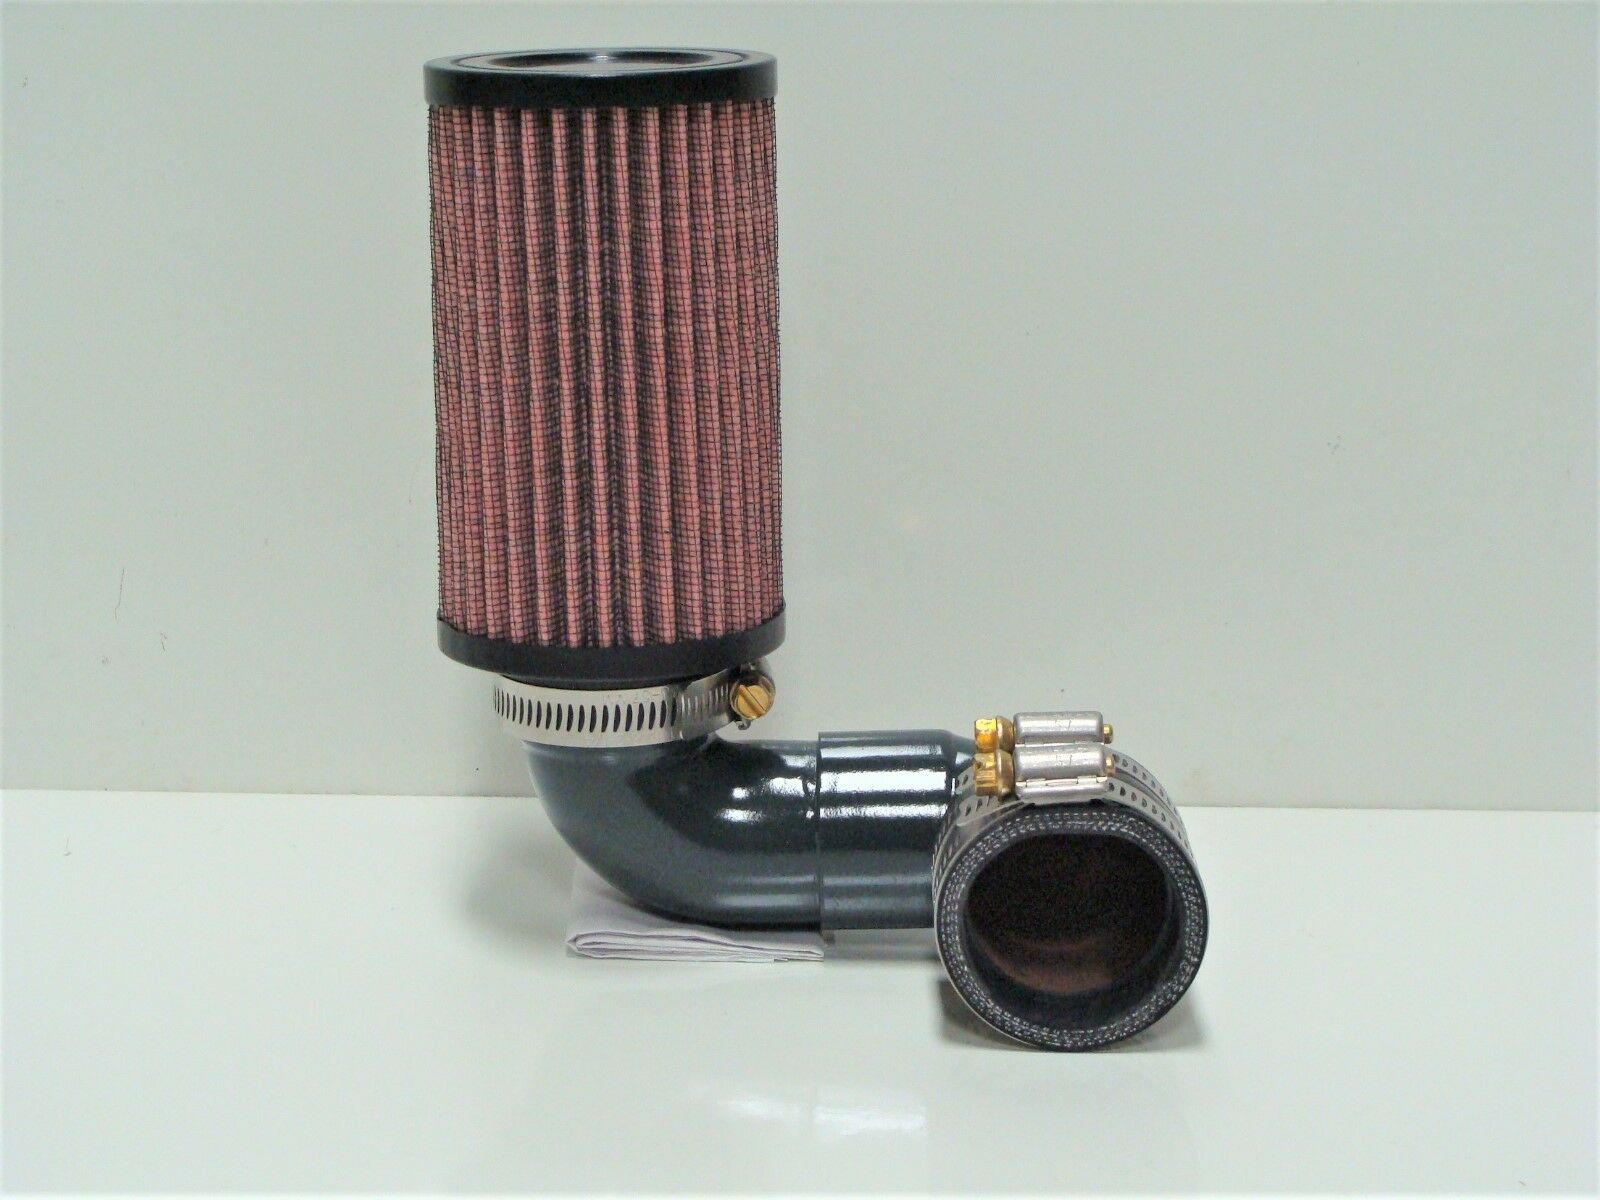 Ford Model A B air cleaner with K&N filter will fit Tillotson Zenith Carb